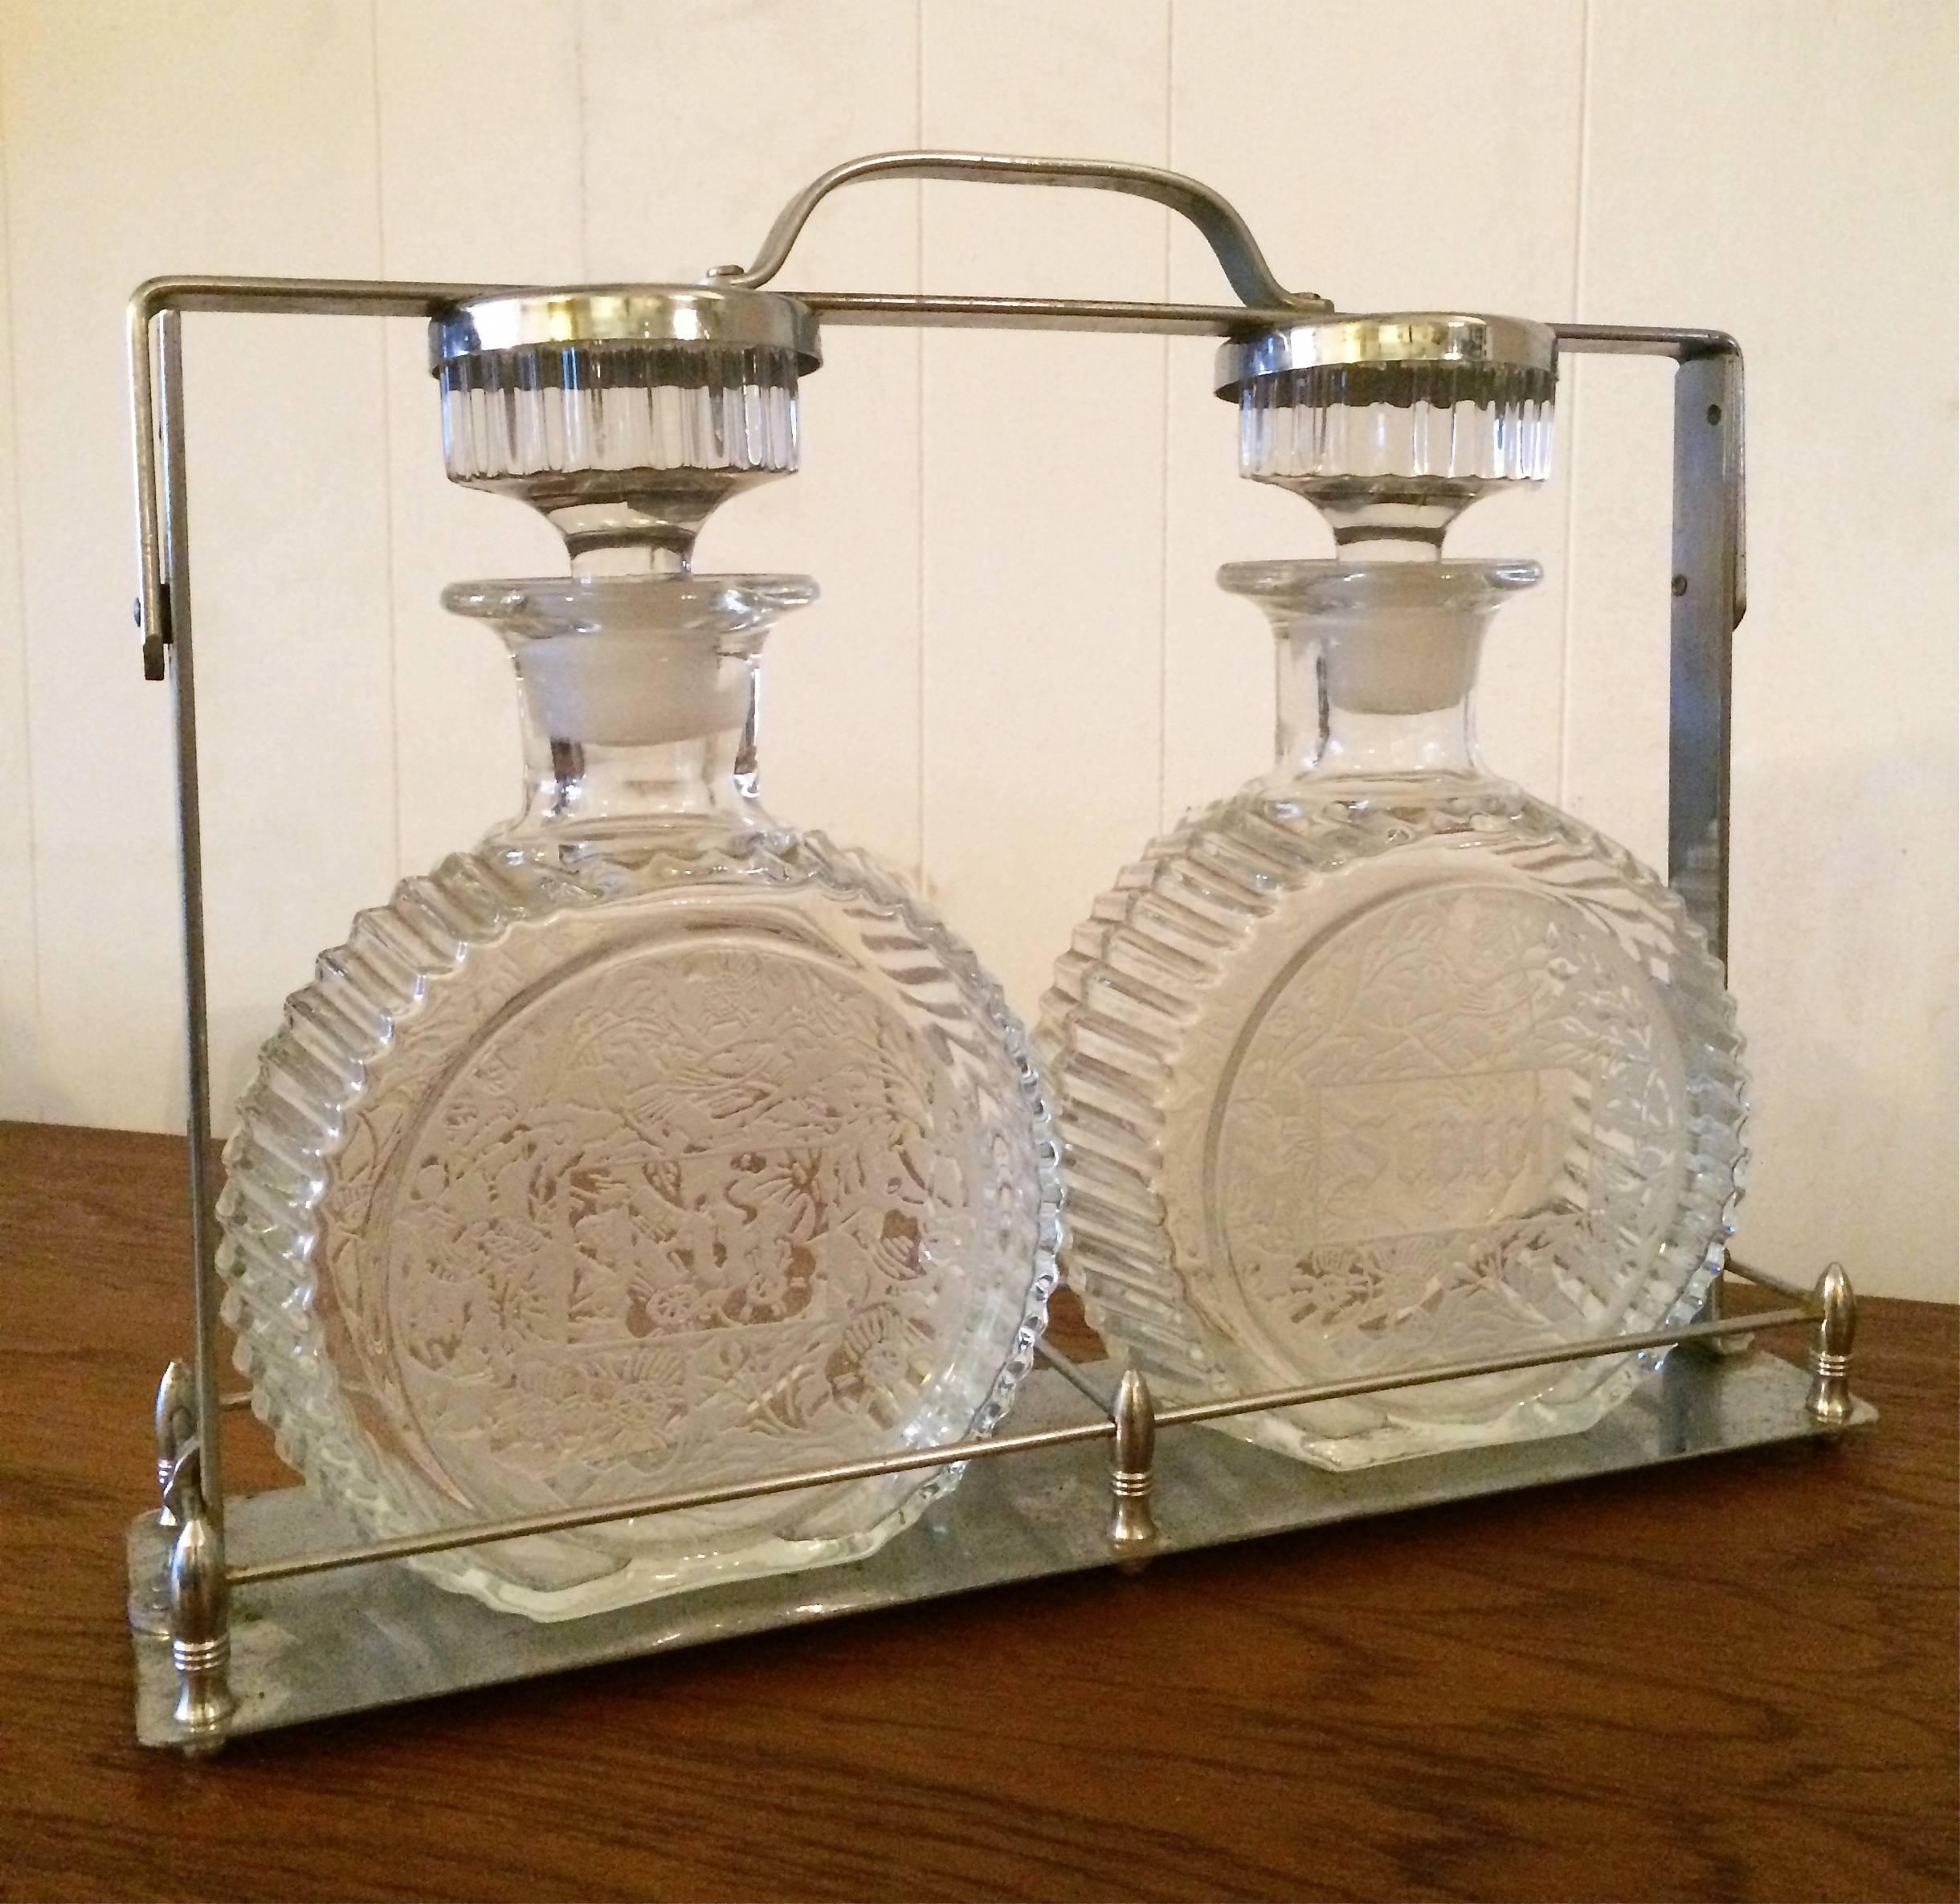 Crystal liquor tantalus decanter set has two, cut, acid etched, crystal decanters marked Scotch and Rye in a chrome caddy.

Frame is 13.5